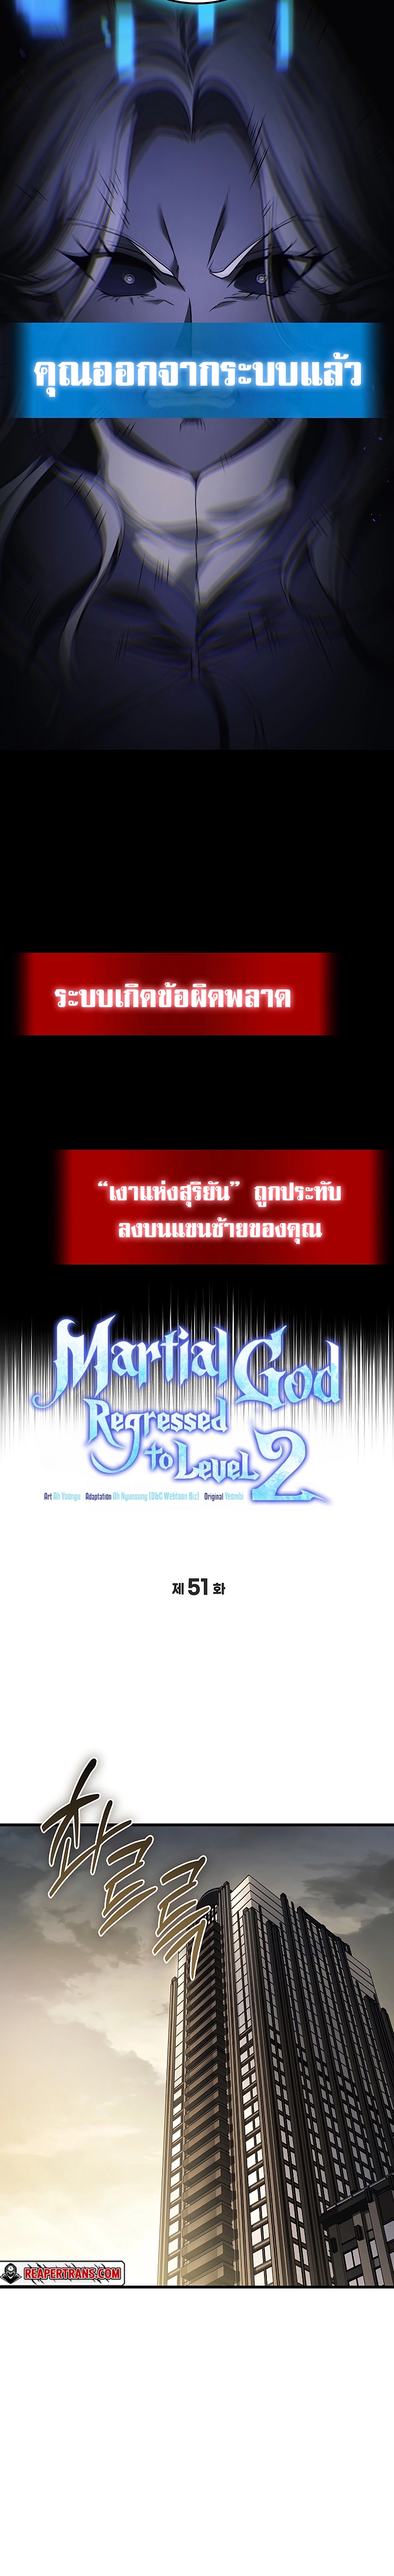 Martial God Regressed to Level 2 51 (6)